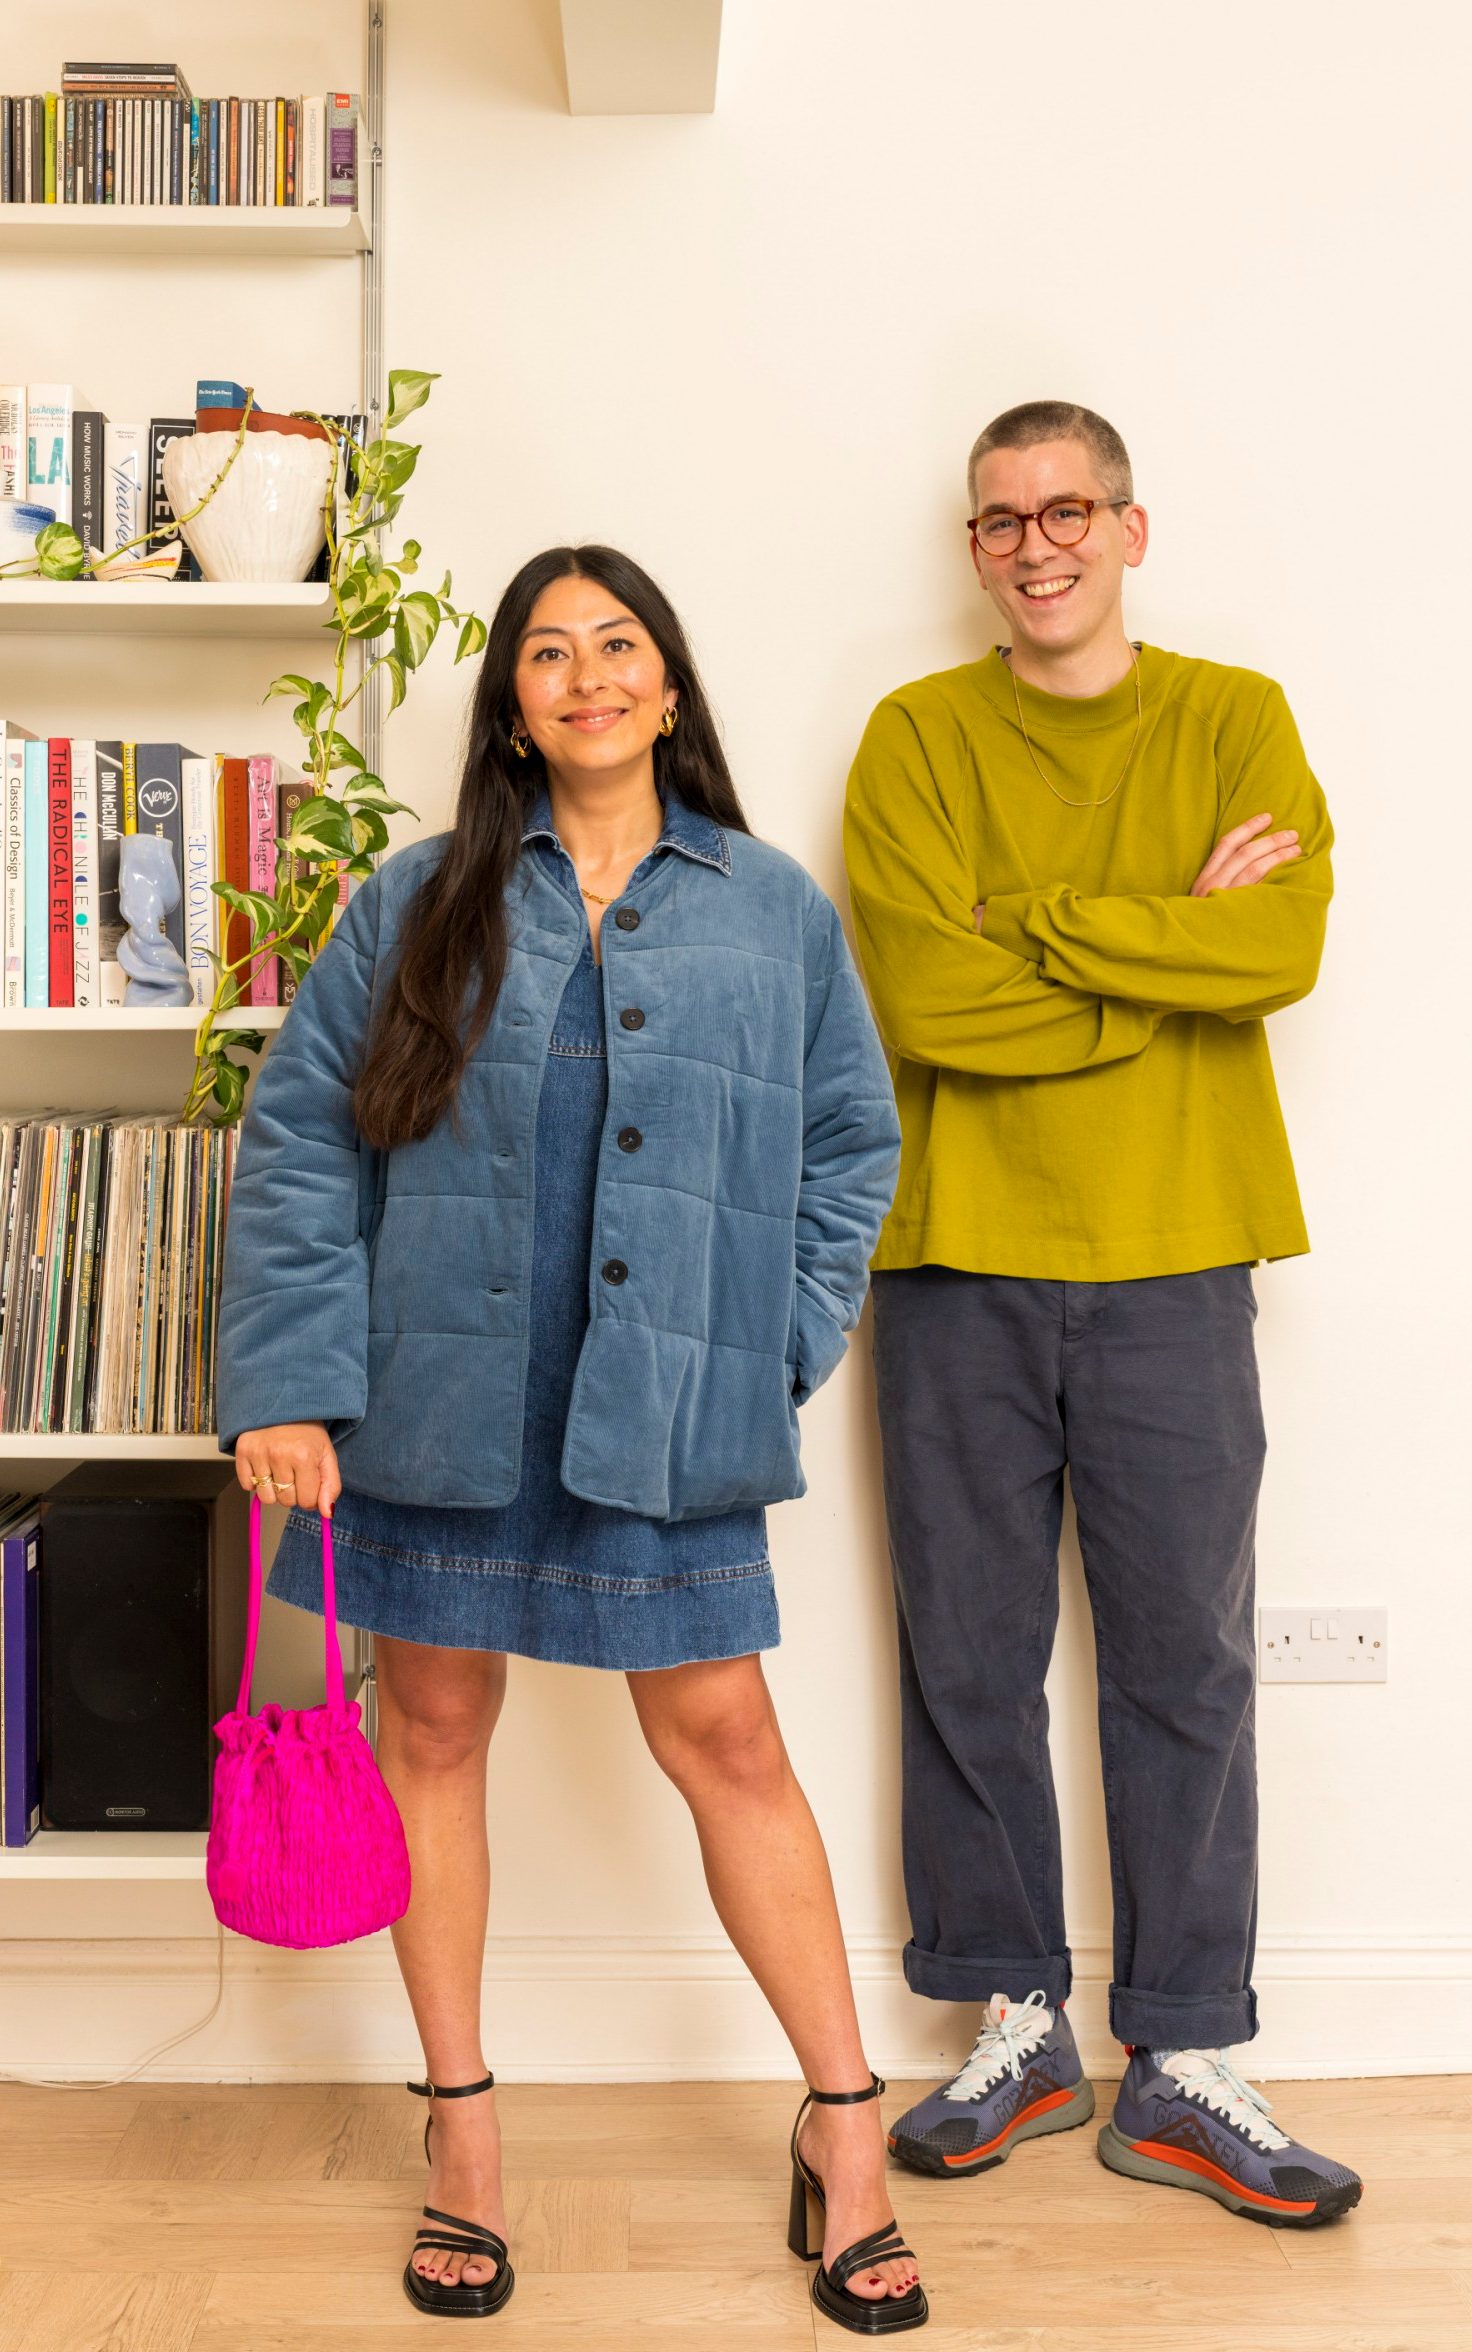 ‘when i saw the clothes, i wondered if he’d ever met me’: i let my husband dress me